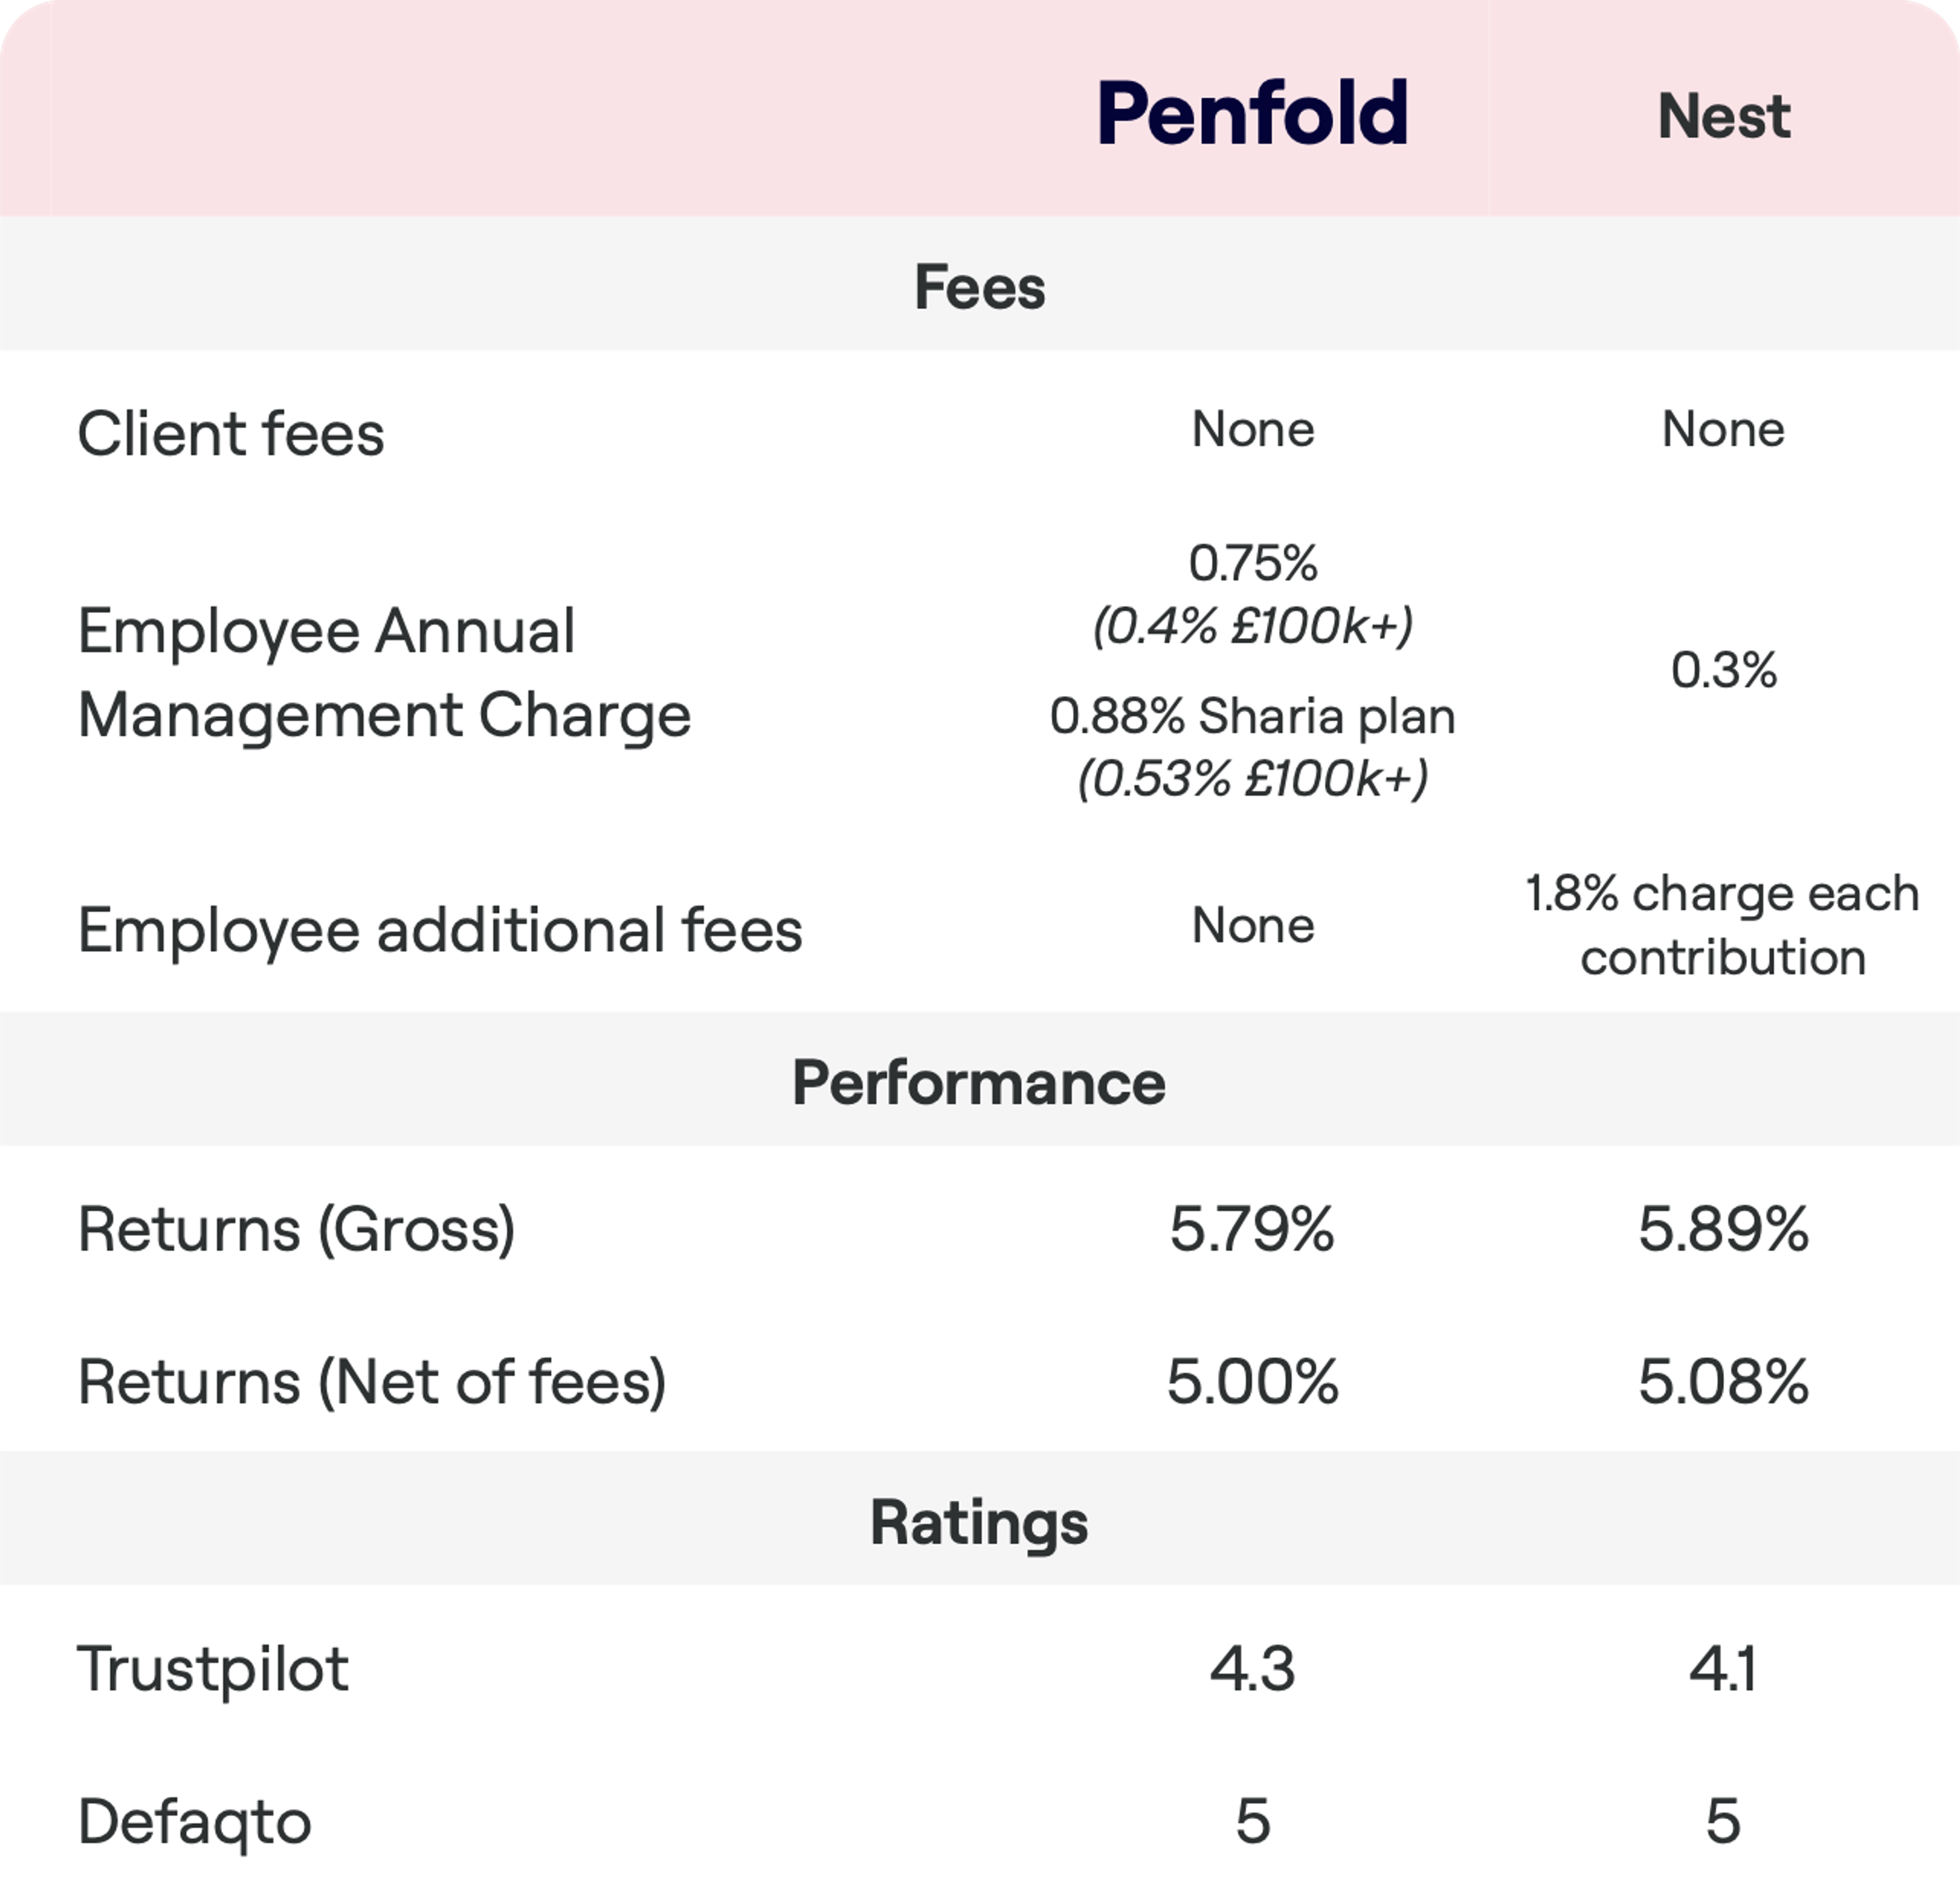 A comparison chart of fees, performance, and ratings for Penfold and Nest pensions. Both have no client fees. Penfold has an Employee Annual Management Charge of 0.75% (reducing to 0.4% for amounts over £100k), with a Sharia plan charge of 0.88% (reducing to 0.53% for amounts over £100k). Nest's employee charge is 0.3%, with an additional 1.8% charge per contribution. Penfold's gross return is 4.29%, net return after fees is 3.51%, while Nest's gross return is 5.22%, net return 4.41%. Trustpilot rates Penfold at 4.3 and Nest at 4.1, while Defaqto rates Penfold 4 and Nest 5.